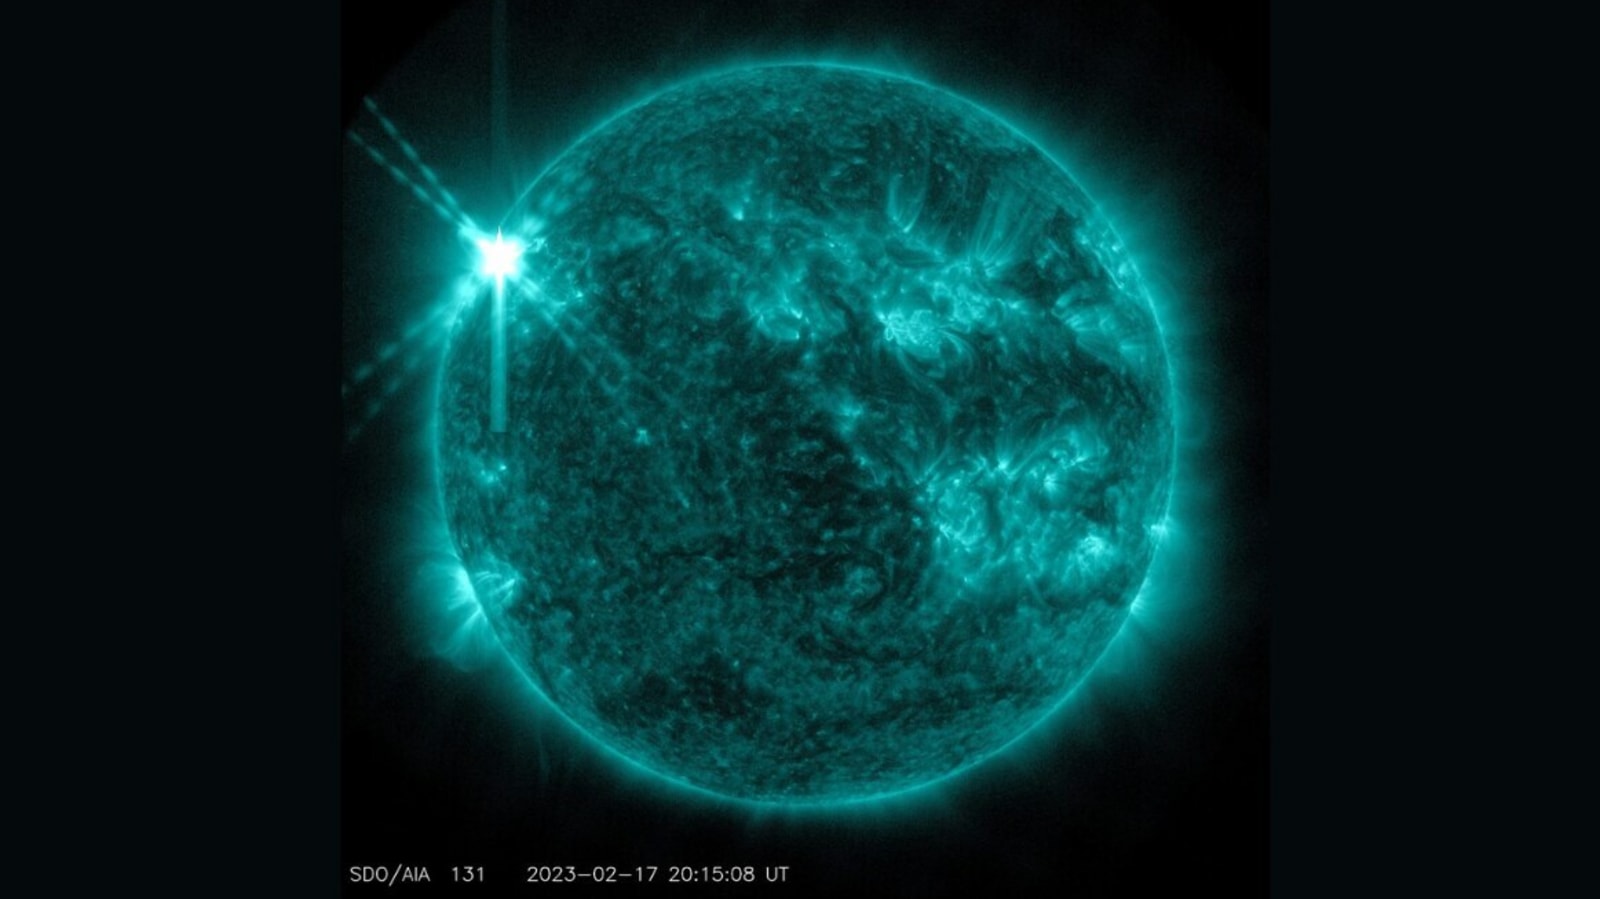 EXTREME solar flare eruption sparked BLACKOUTS, NASA said; Another solar storm coming?